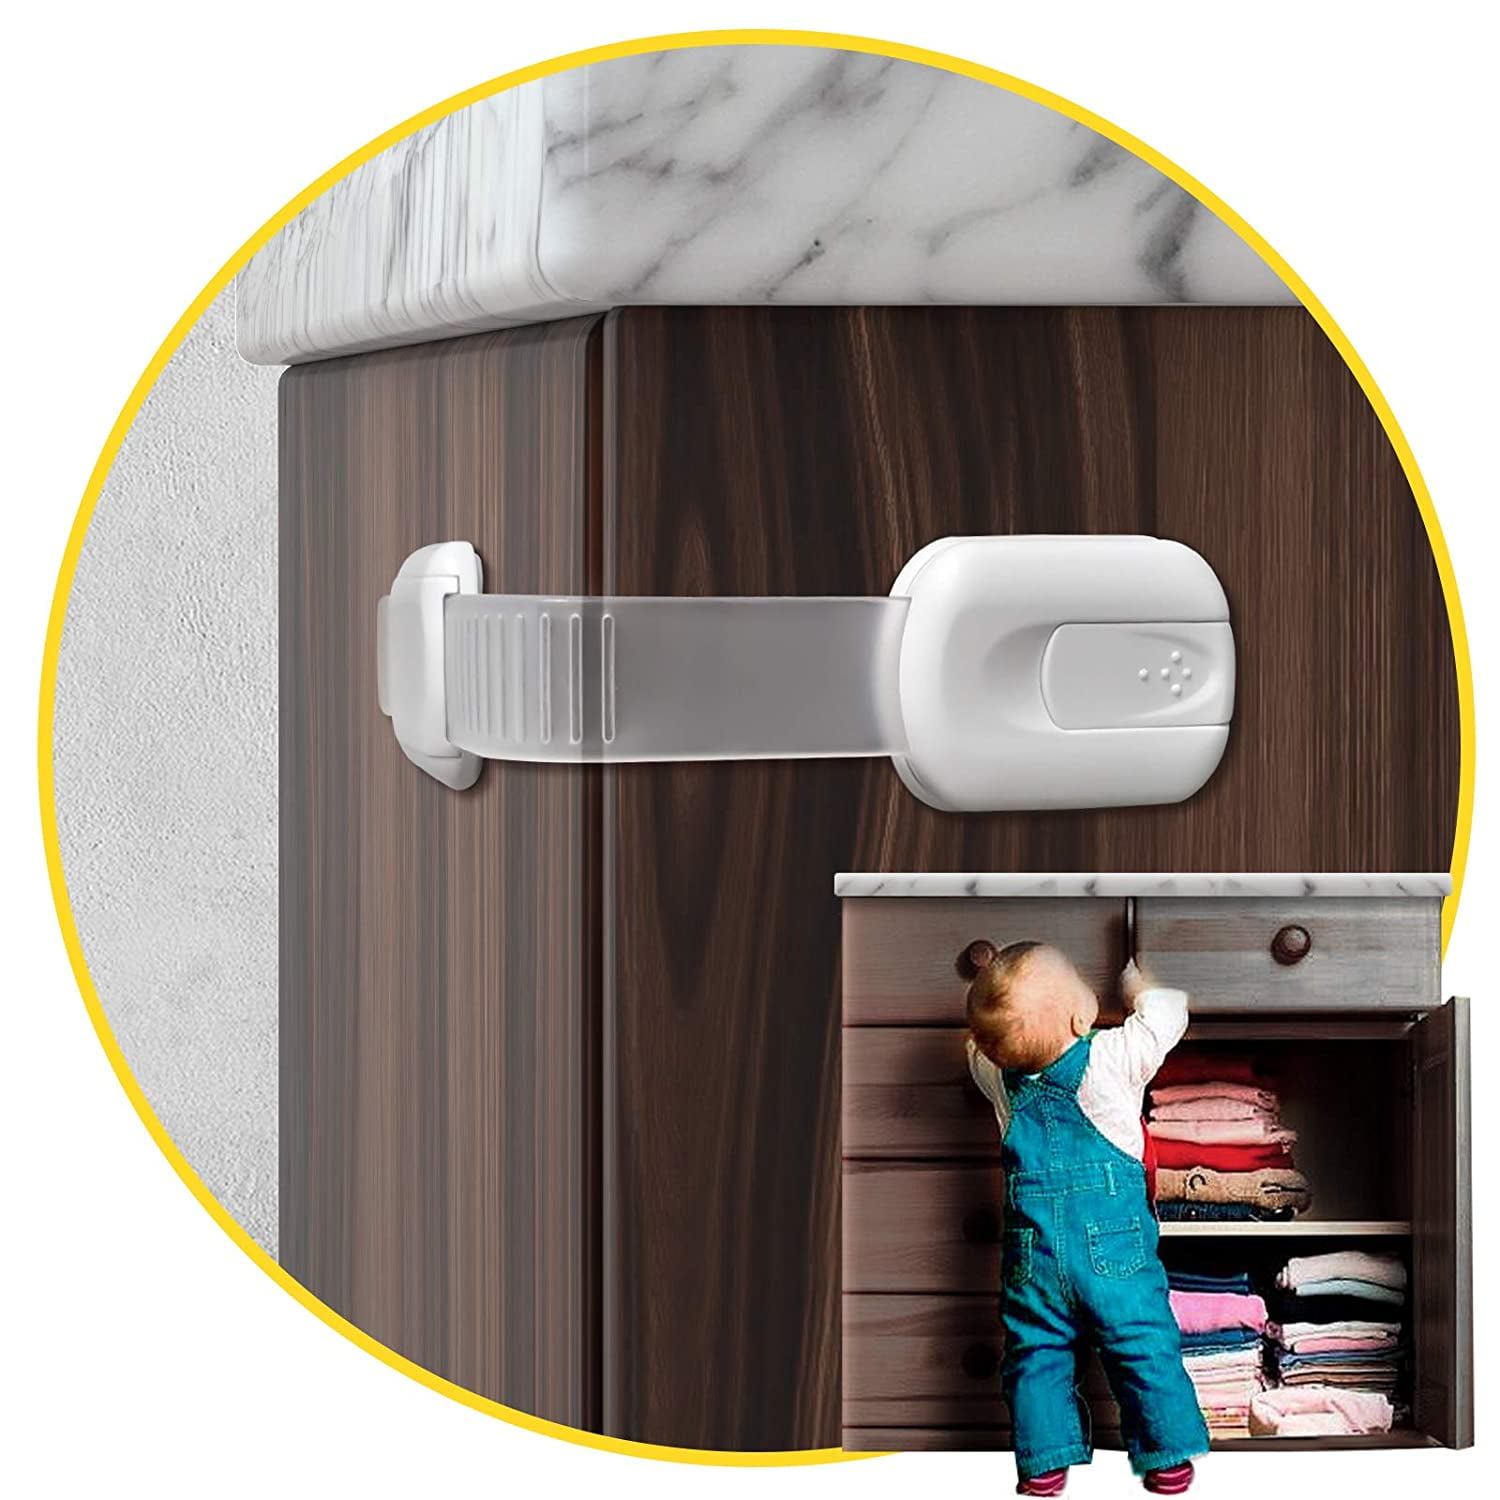 Quickest and Easiest 3M Adhesive Baby Proofing Latches Toilet Seats All-in-one Super Va VASLON Baby Safety Kits Ovens No Screws or Magnets Multi-Purpose for Furniture Baby Proofing 3M Adhesives Adjustable Strap Latches to Cabinets,The Safest Kitchen